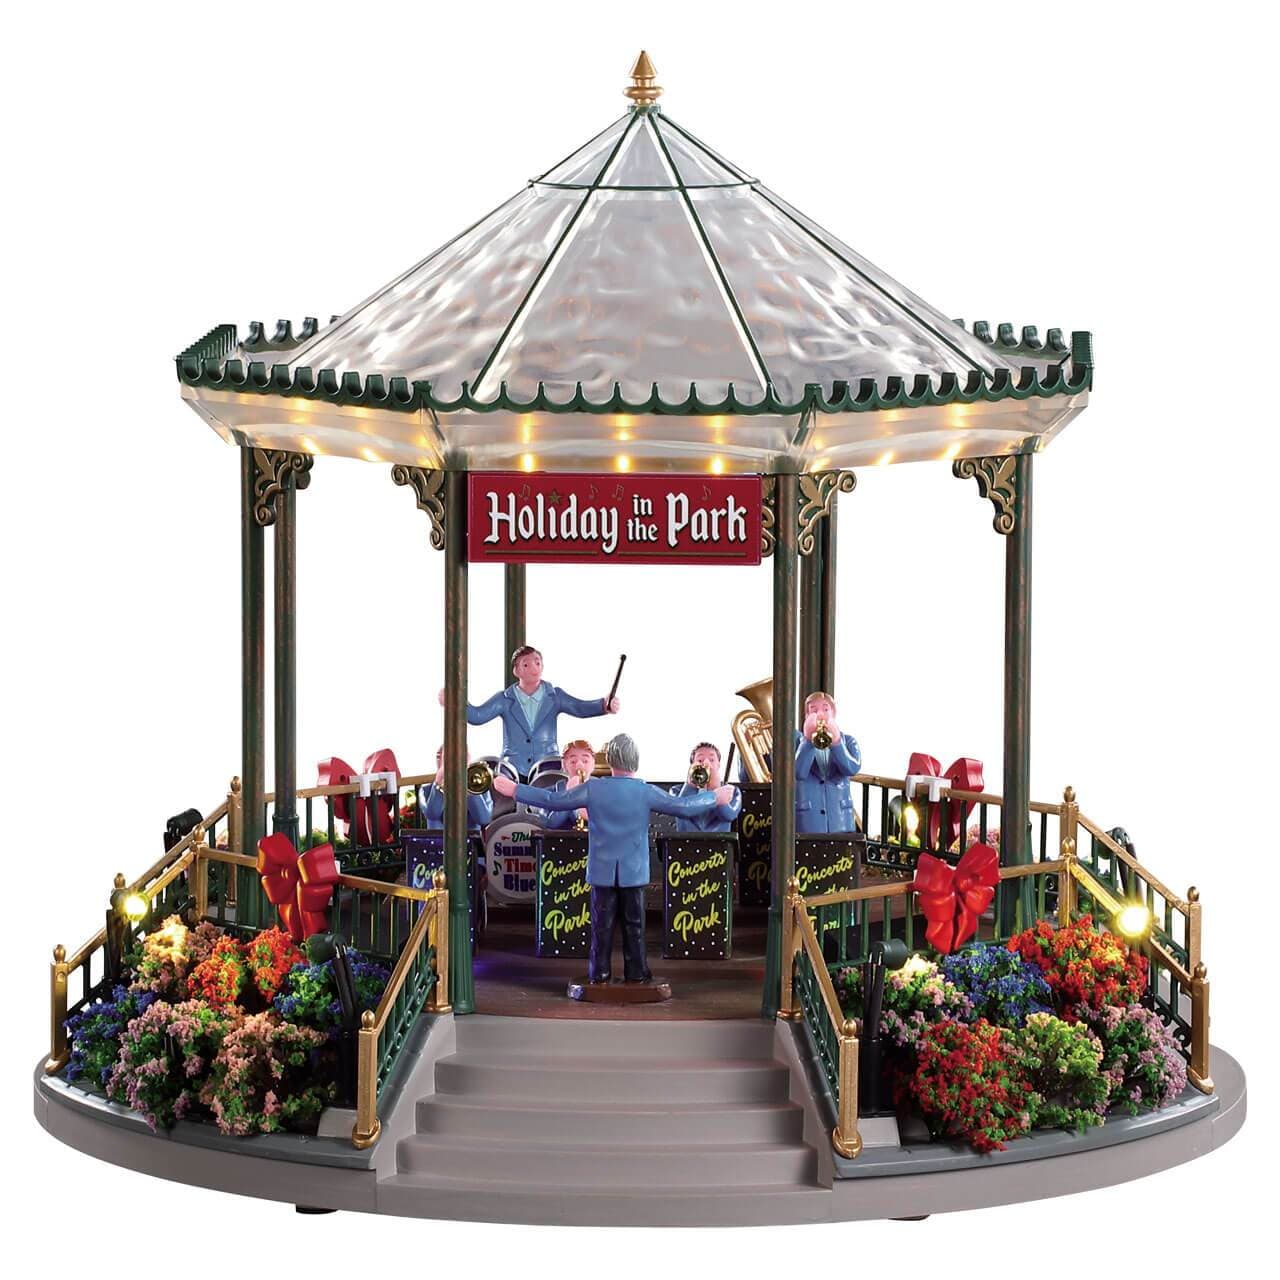 Lemax Sights and Sounds Lemax Holiday Garden Green Bandstand, Christmas Village Accessory, Adaptor Included